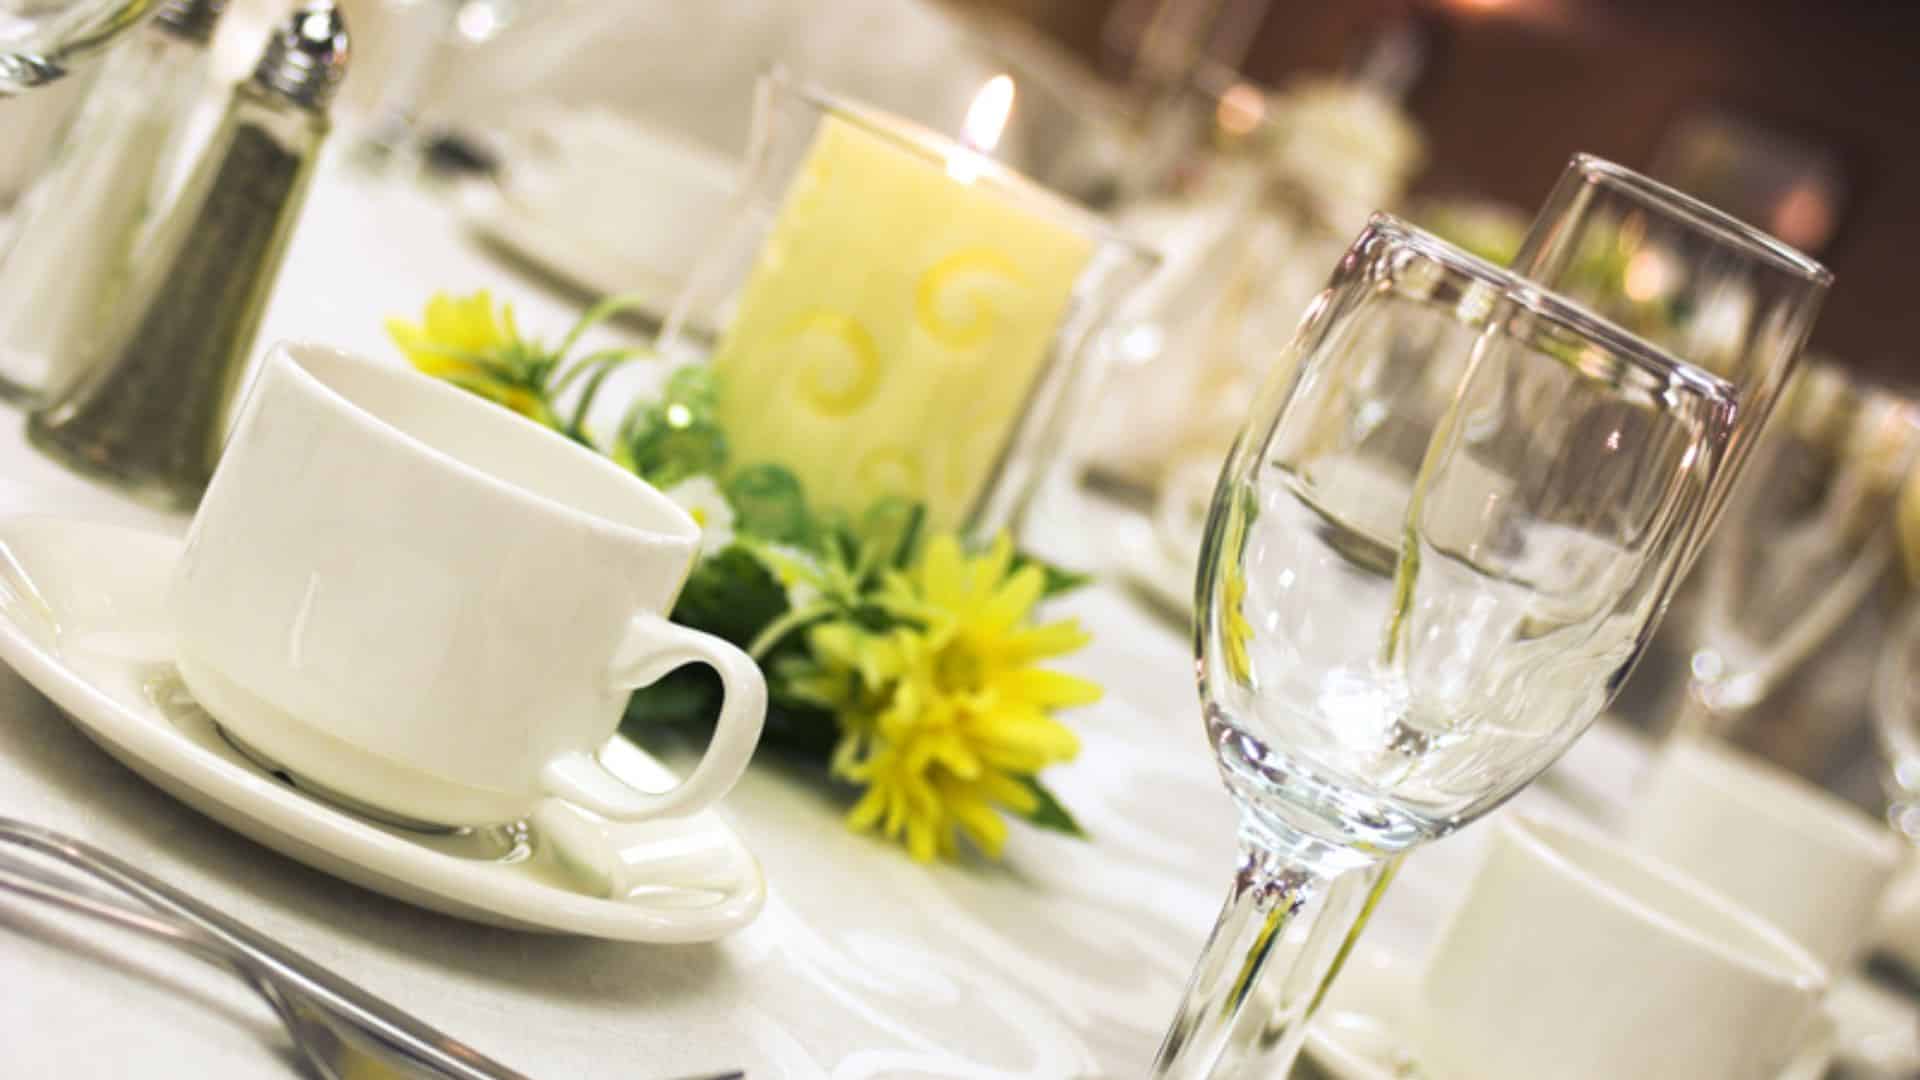 Close up view of glasses, white coffee cups with saucers, and a yellow candle on a white tablecloth